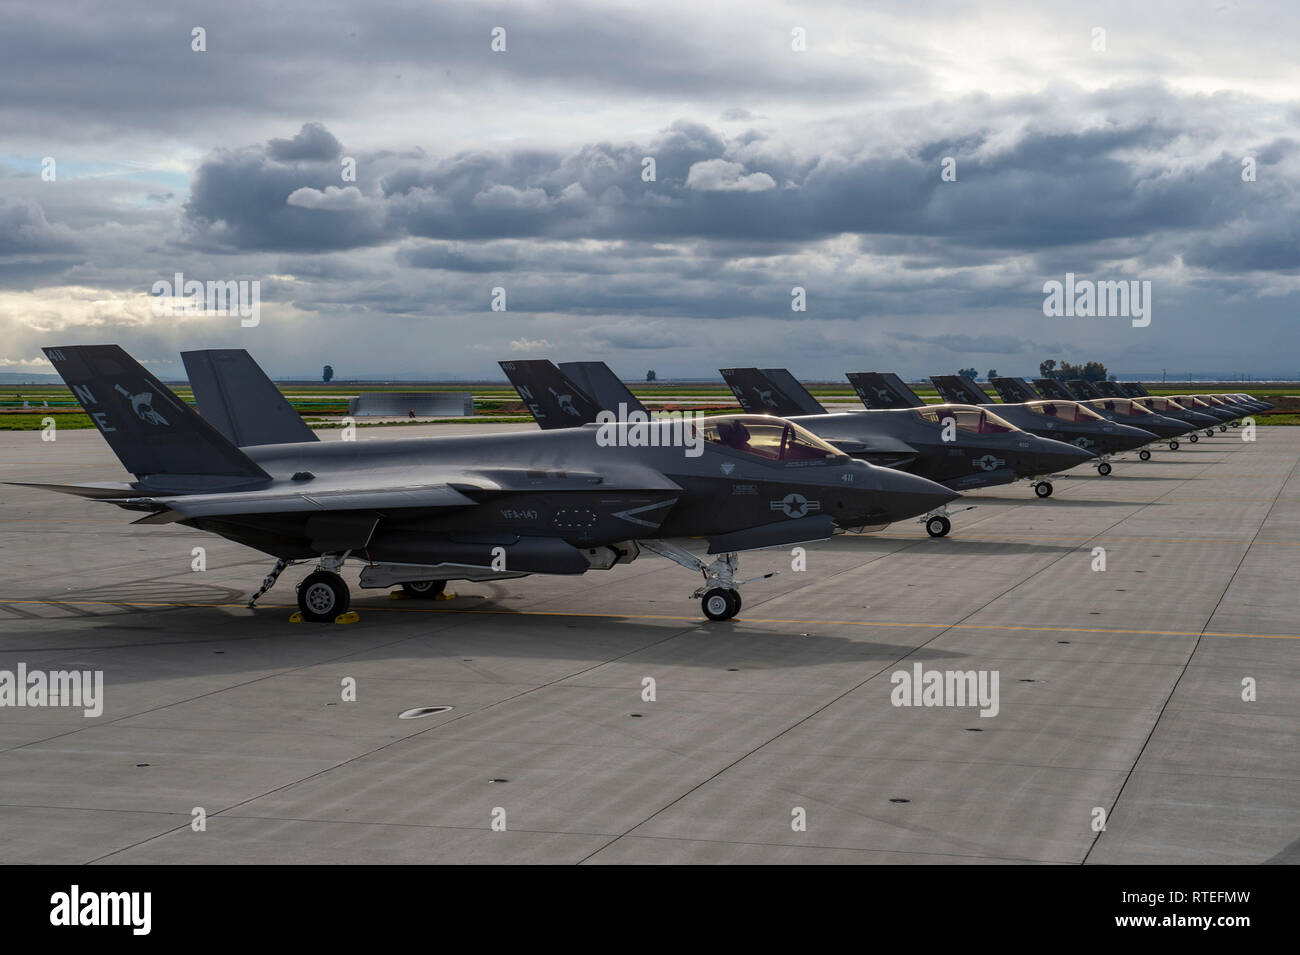 190227-N-WR119-0043 NAVAL AIR STATION LEMOORE, Calif. (Feb. 27, 2019) Ten F-35C Lightning II jets of the 'Argonauts' of VFA-147 aircraft sit on the flight line at Naval Air Station Lemoore (NASL).  Commander, Naval Air Forces, Vice Admiral DeWolfe Miller H. III and United States Marine Corps Deputy Commandant for Aviation (DCA), Lieutenant General Steven R. Rudder jointly announced that the F-35C met all requirements and achieved Initial Operating Capability (IOC) 28FEB.  Achieving IOC means the F-35C is available to be used in deployed environments as requested by combatant commanders. (U.S.  Stock Photo